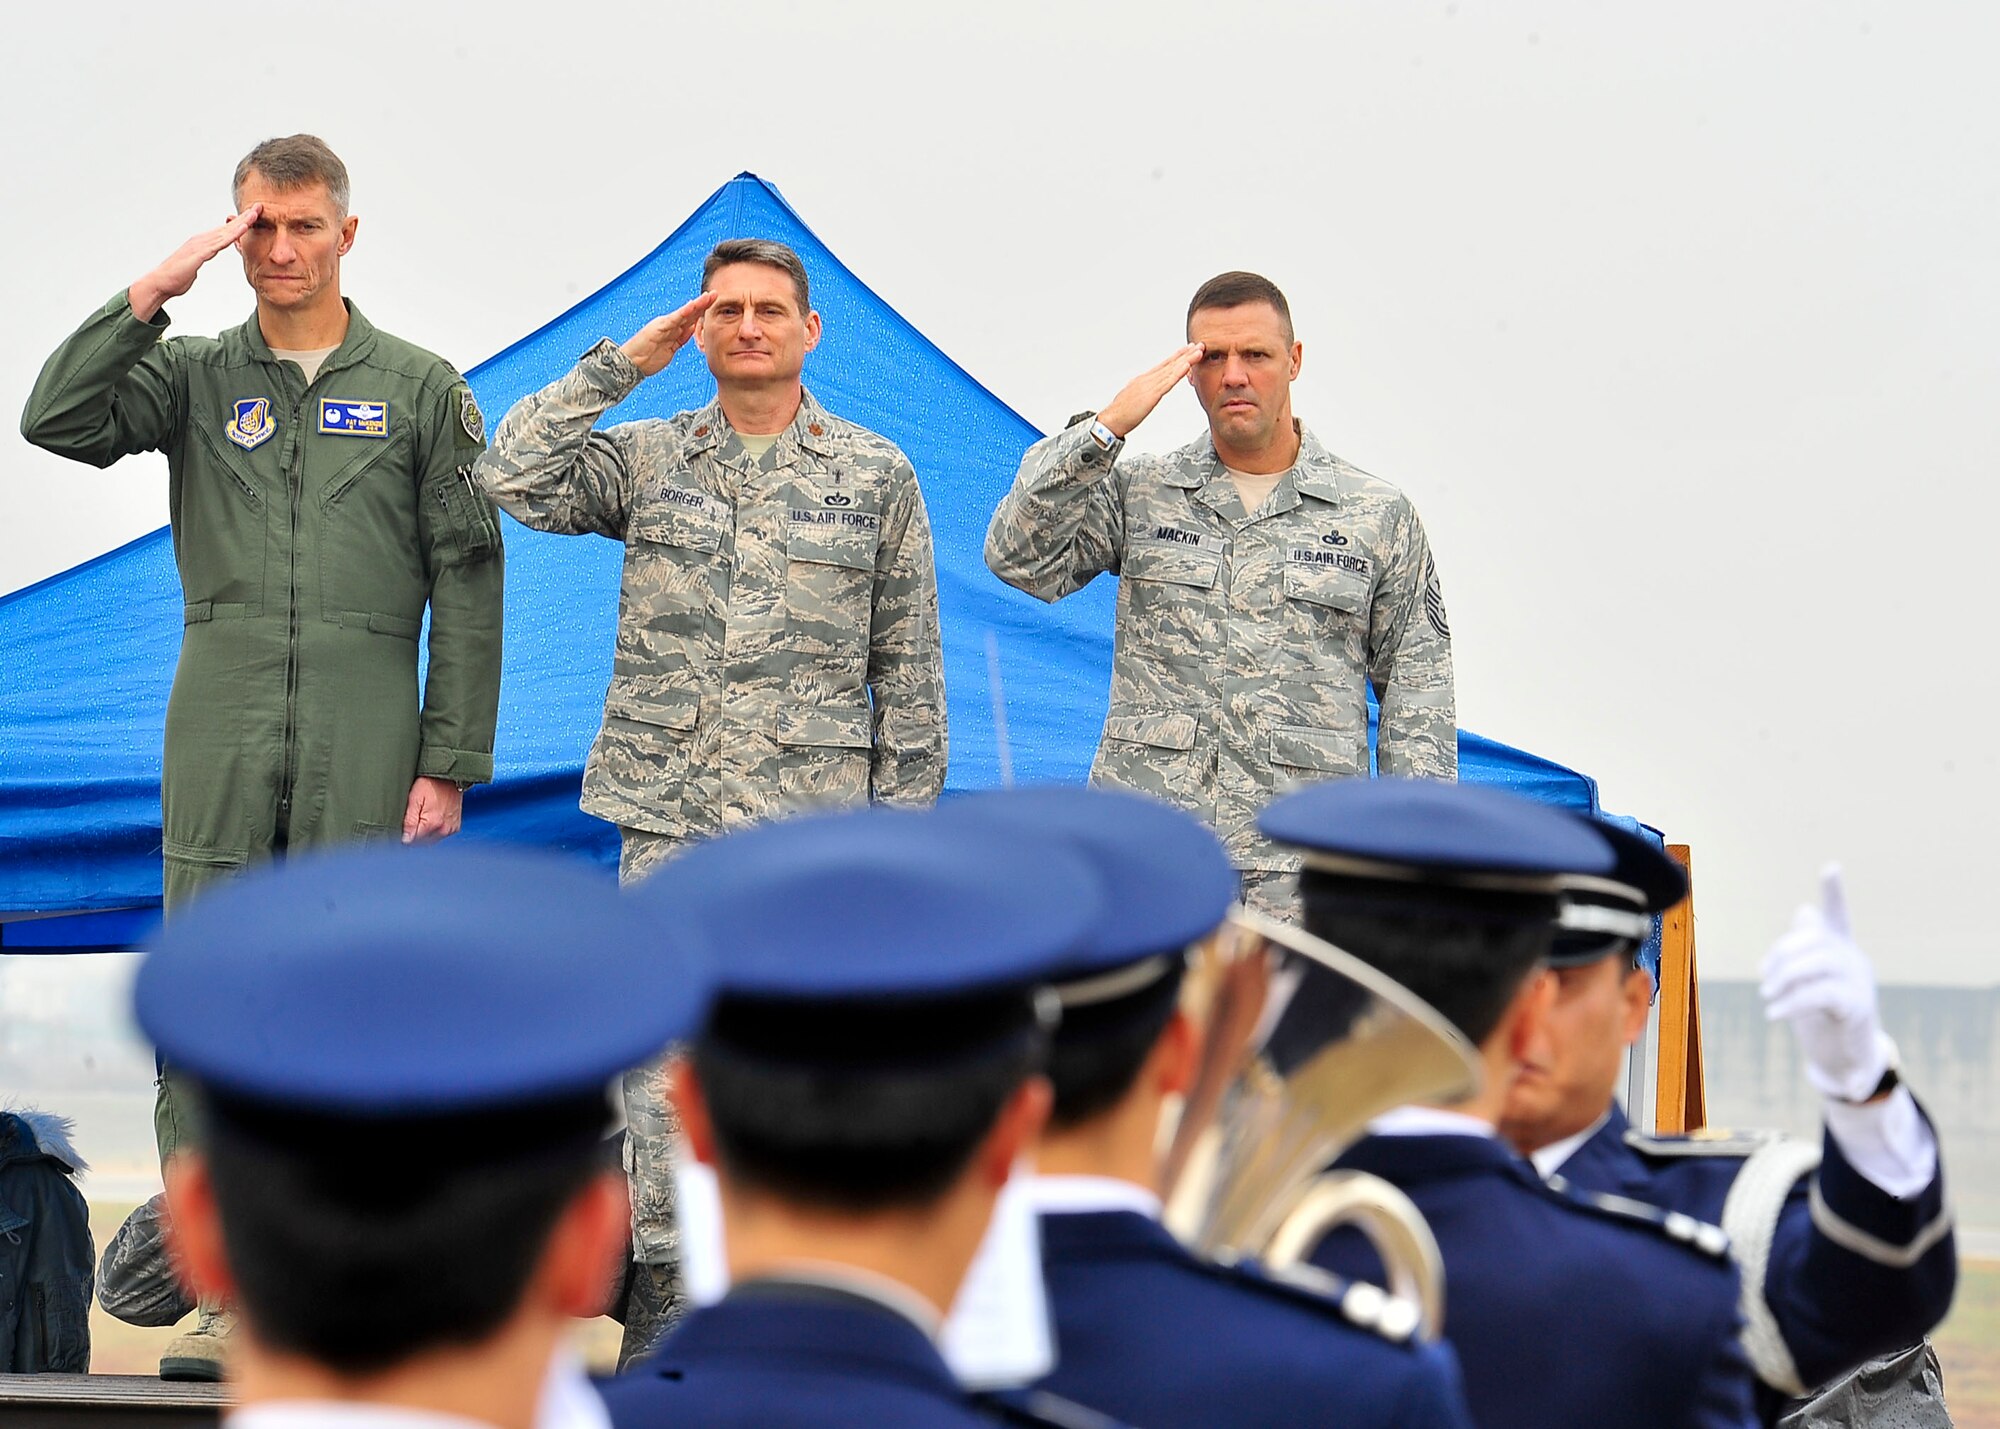 (Left) Col. Patrick McKenzie, 51st Fighter Wing commander, Maj. Robert Borger, 51st Fighter Wing chaplain and Chief Master Sergeant, Oscar Mackin, 51st Fighter Wing command chief, salute during the playing of the national anthem during Air Power Day Oct. 29, 2011.  More than 50,000 service members and Korean spectators looked toward the sky and witnessed aerial acts from across the globe at the 2011 Air Power Day at Osan Air Base Oct. 29 and 30. (U.S. Air Force photos/Senior Airman Adam Grant)